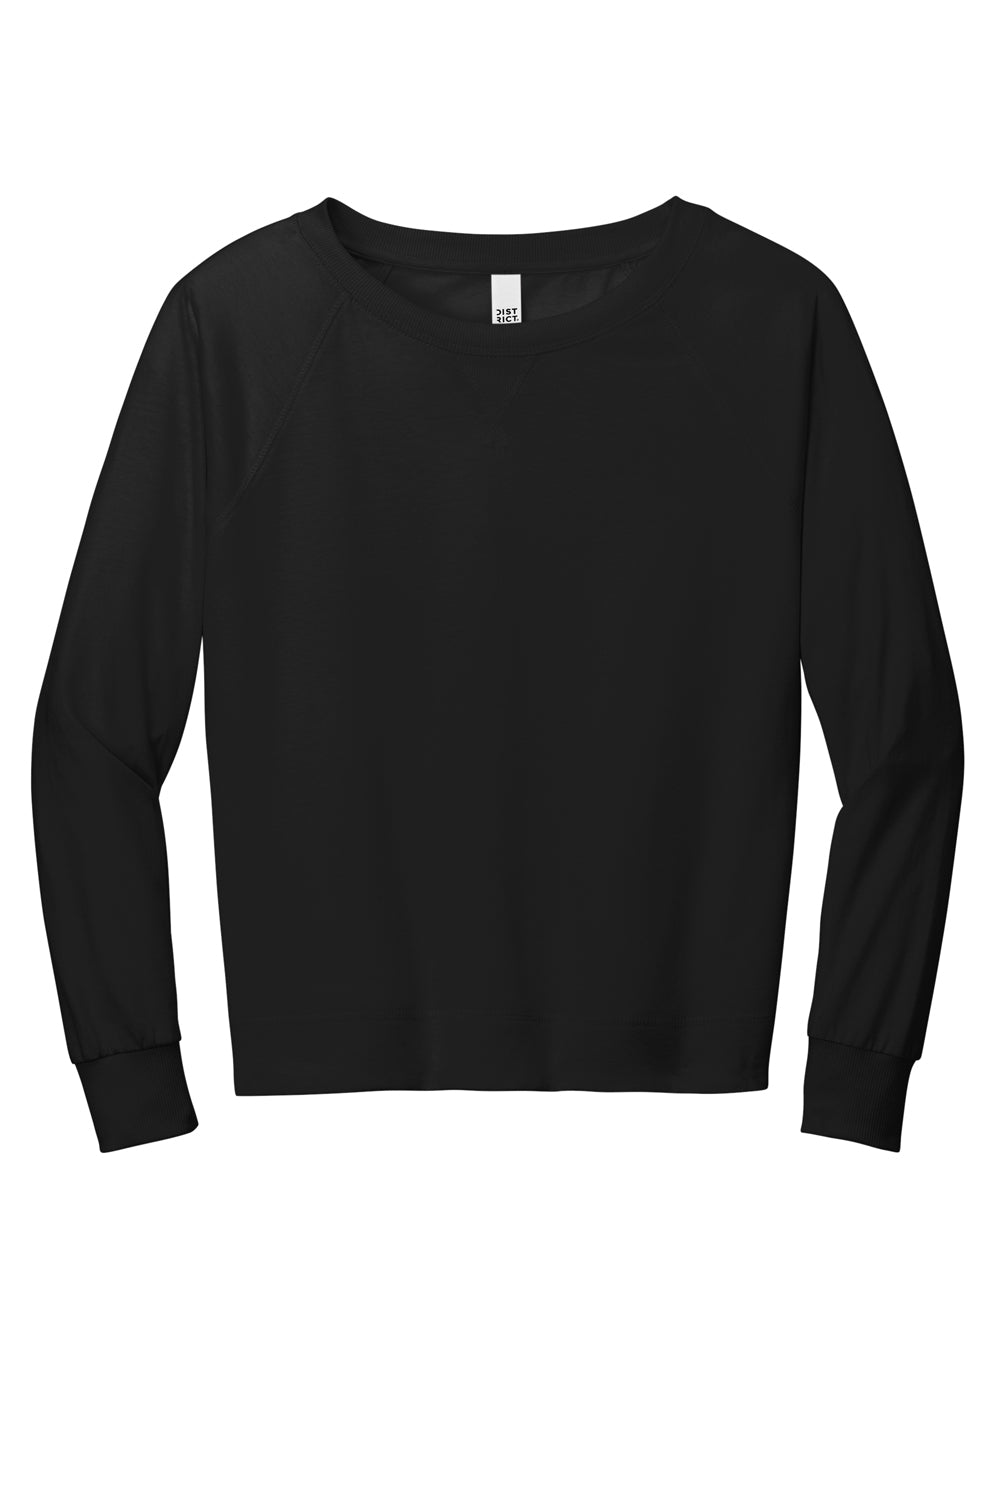 District Womens French Terry Long Sleeve Crewneck Sweatshirt Black Flat Front